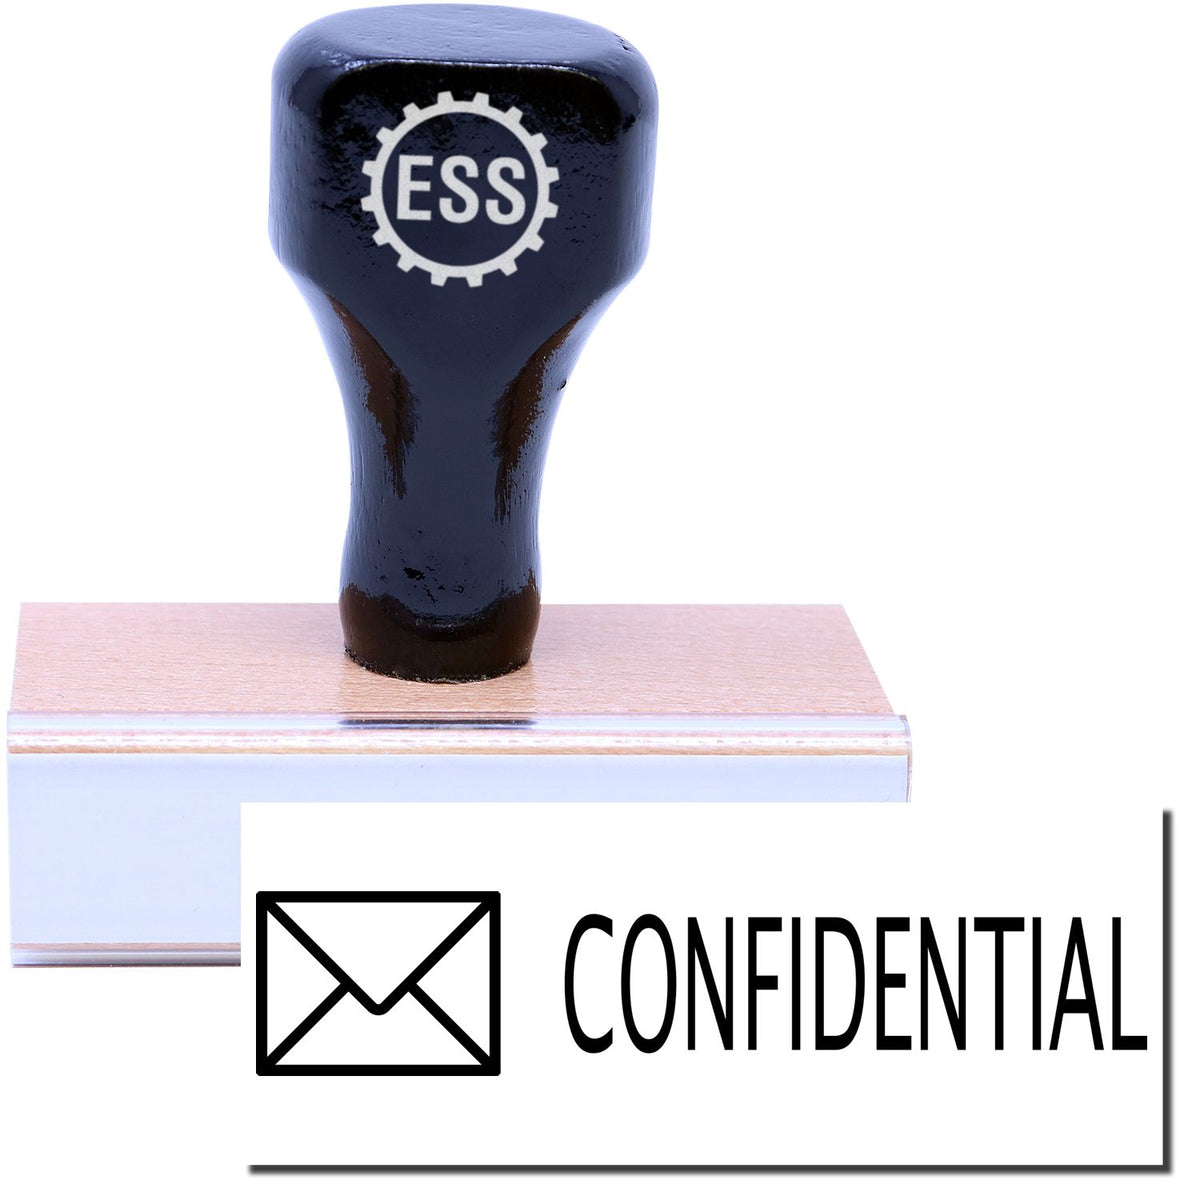 A stock office rubber stamp with a stamped image showing how the text &quot;CONFIDENTIAL&quot; with a small image of an envelope on the left side is displayed after stamping.